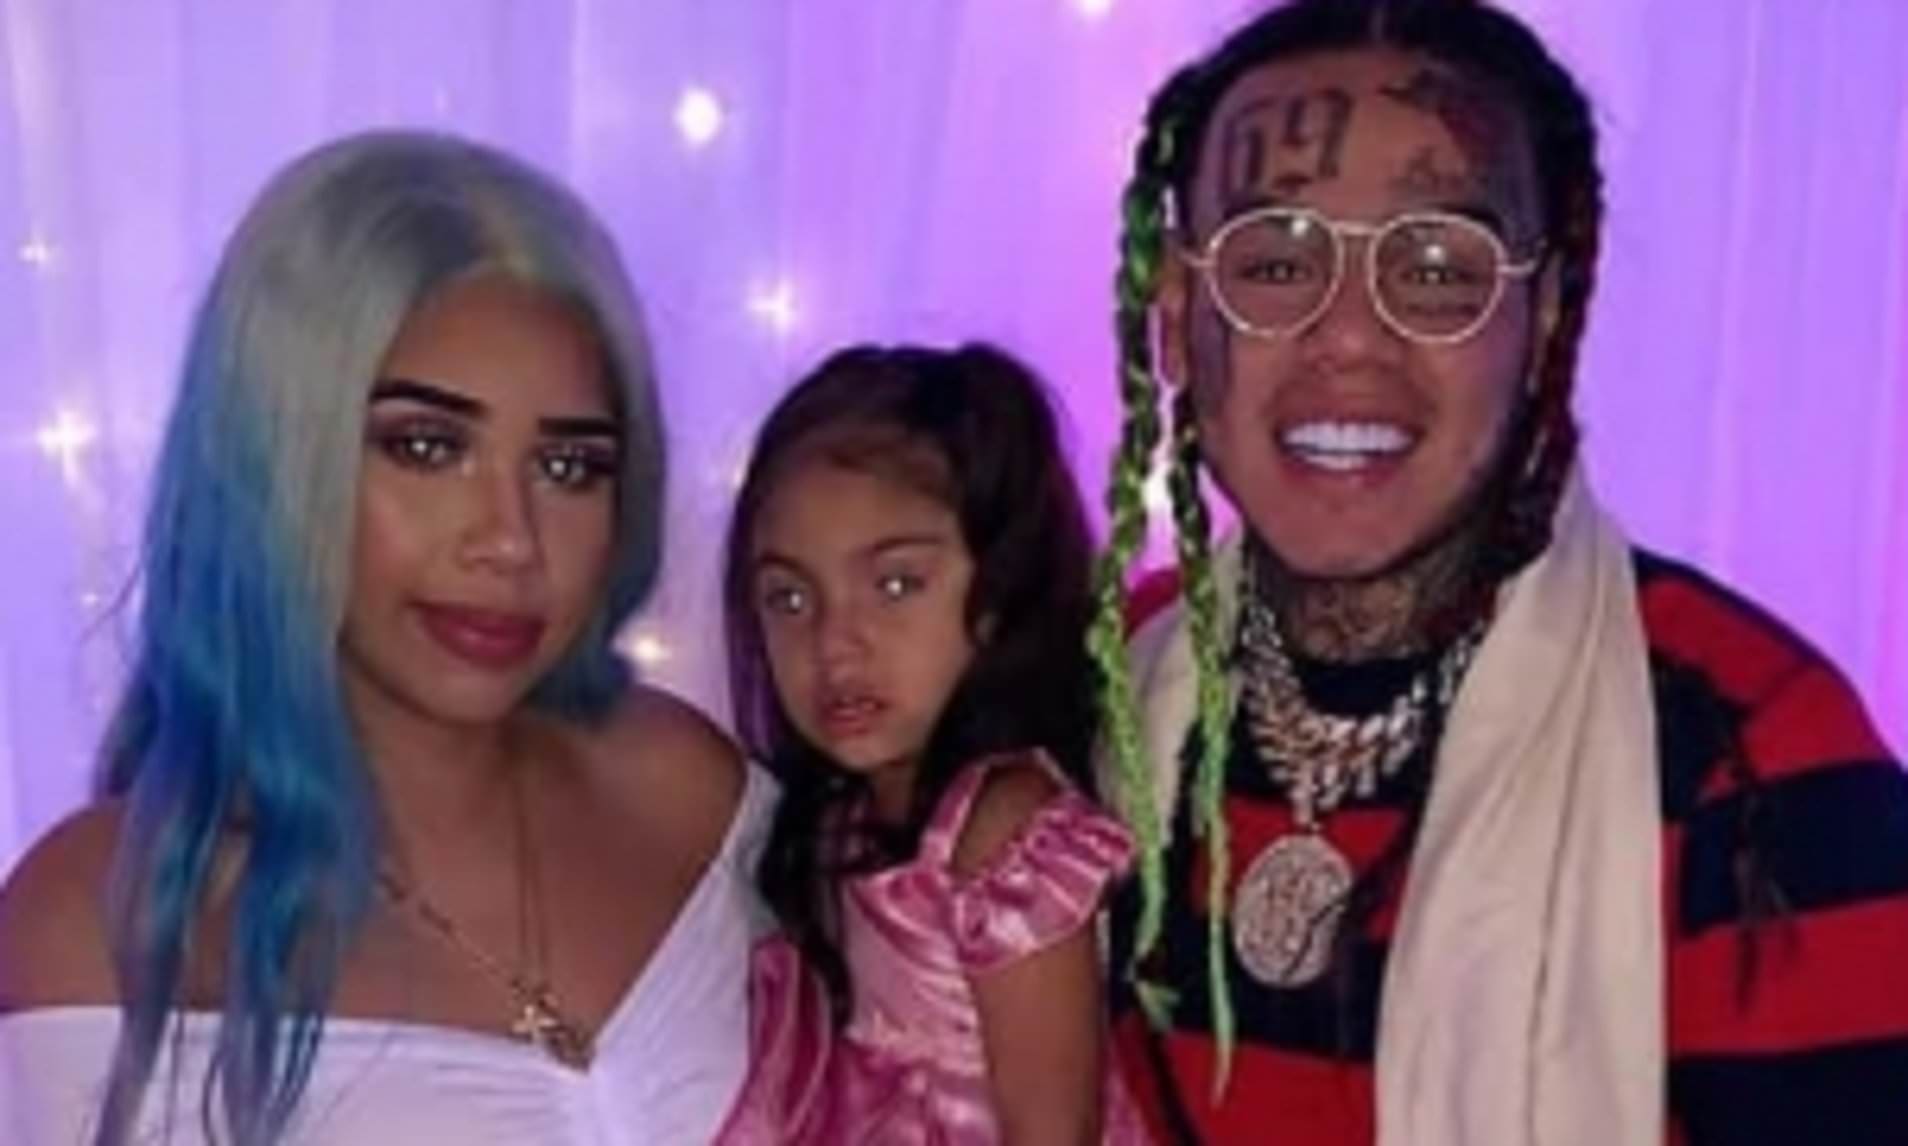 sara-molina-responds-to-tekashi-69s-accusations-of-not-being-able-to-spend-time-with-their-daughter